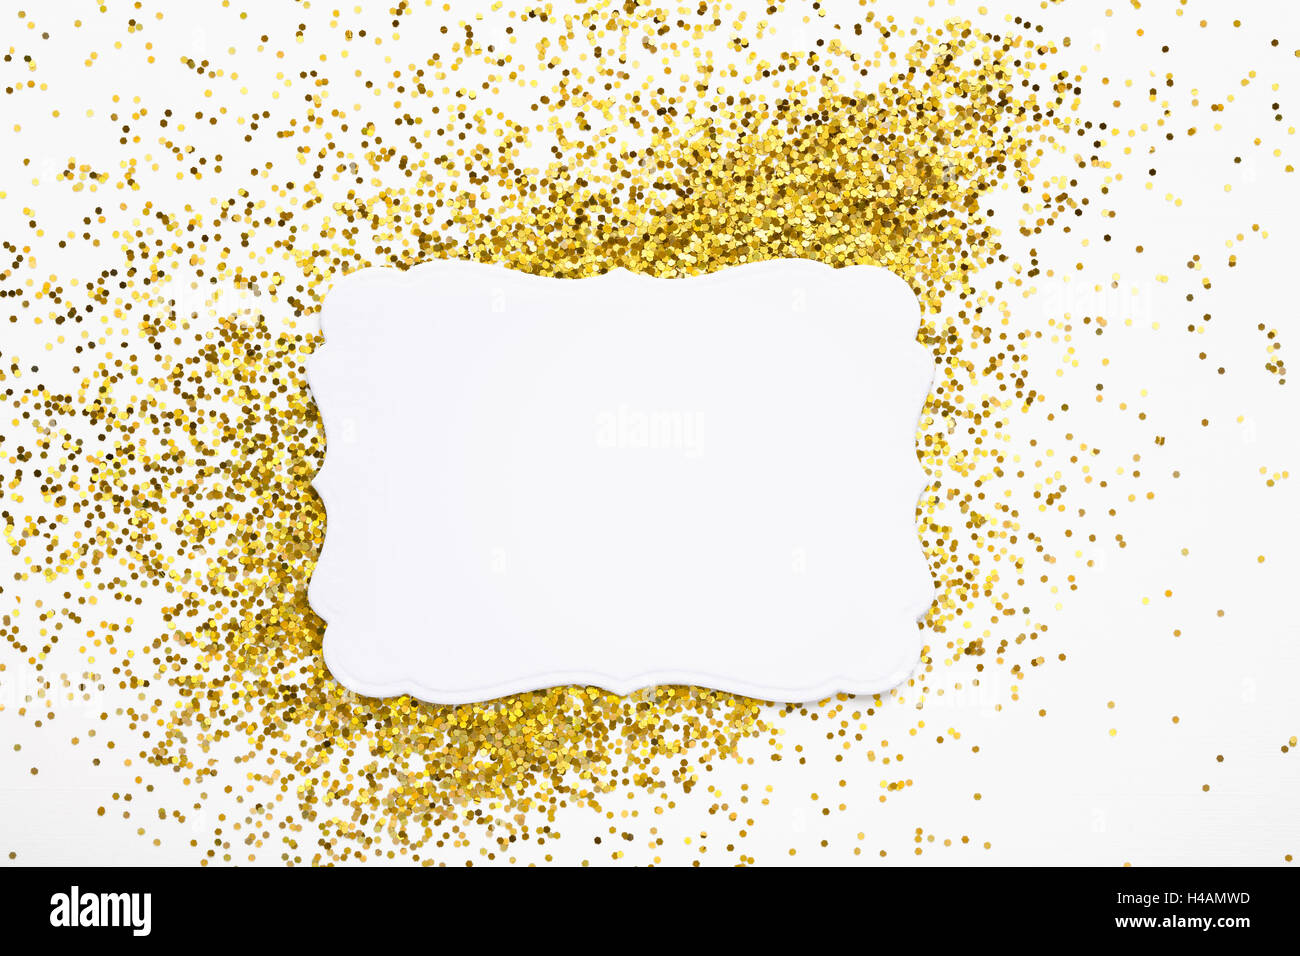 Luxury gold glitter sparkles frame on white with copy space for promotion Stock Photo